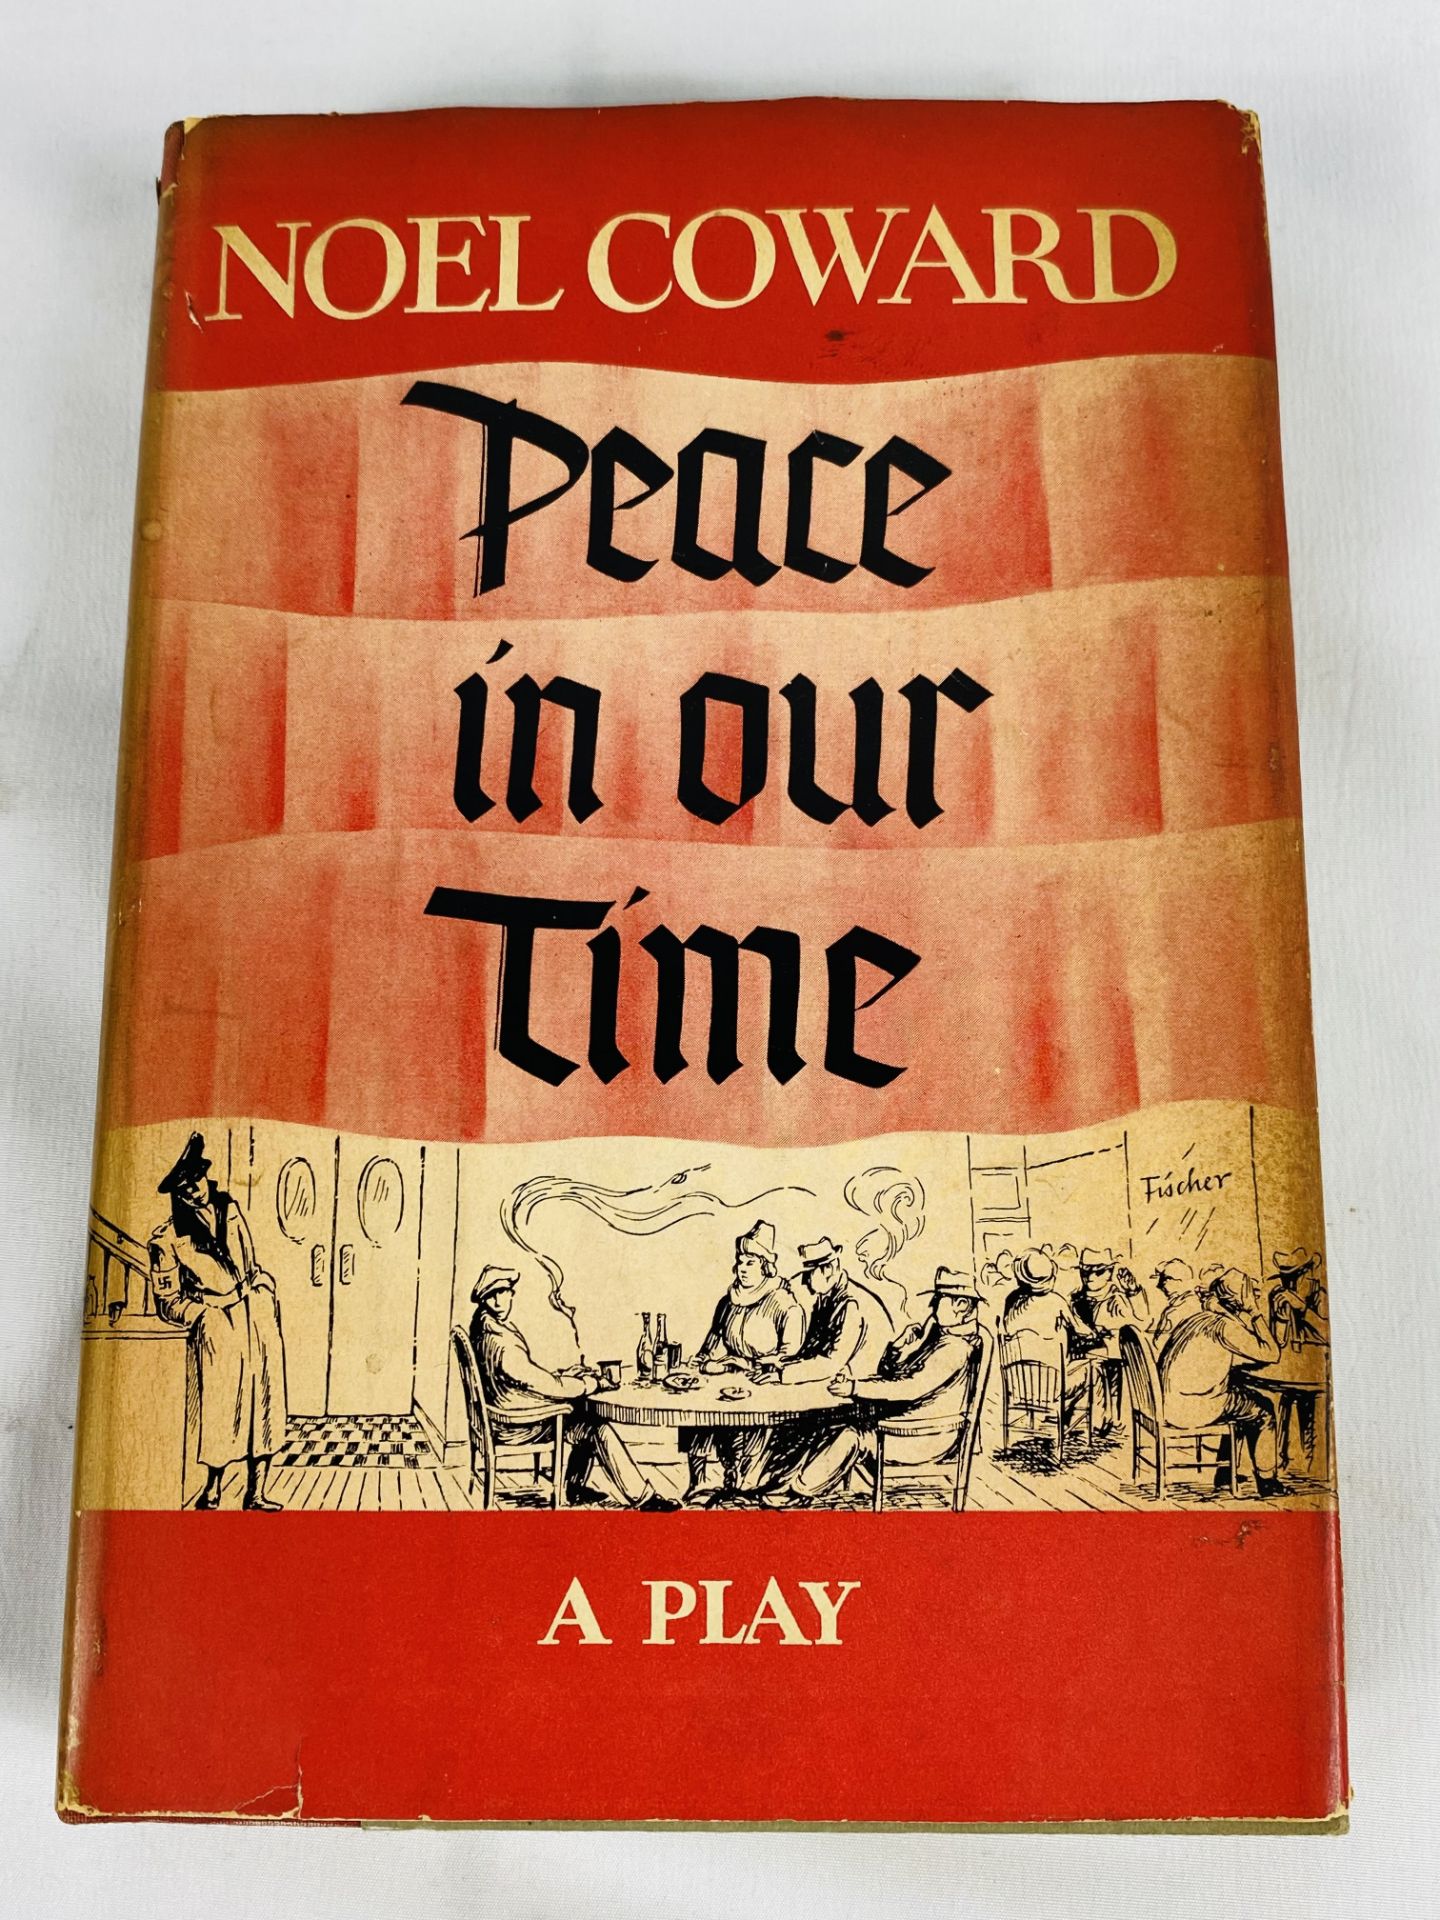 Noel Coward, Peace in our Time: A Play, published Doubleday and Company - Image 2 of 4